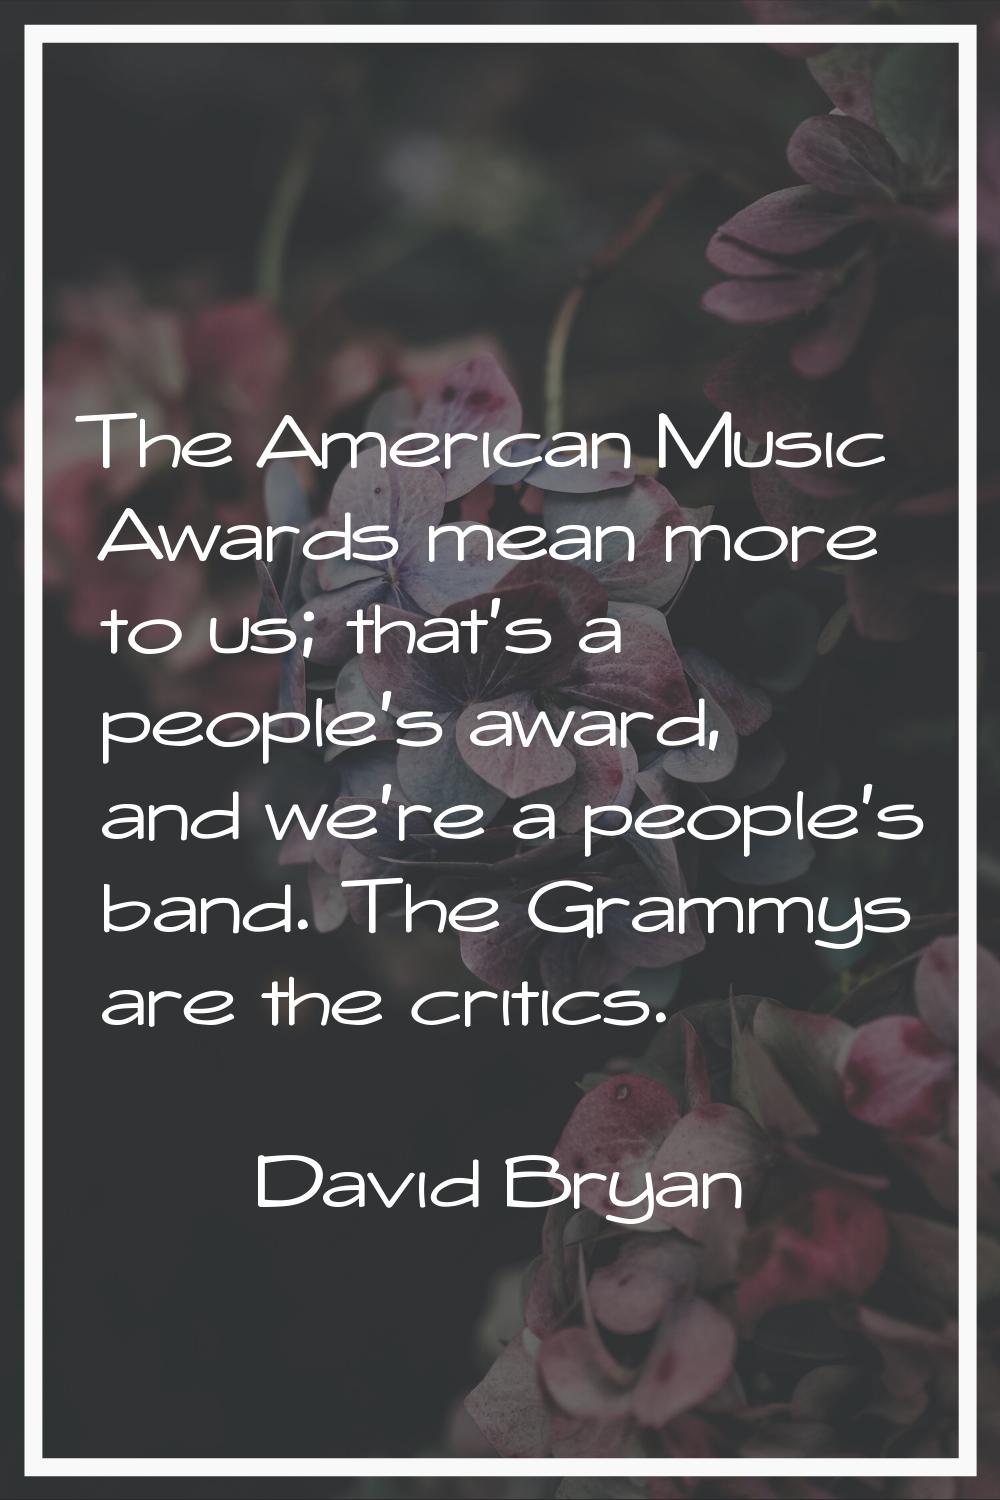 The American Music Awards mean more to us; that's a people's award, and we're a people's band. The 